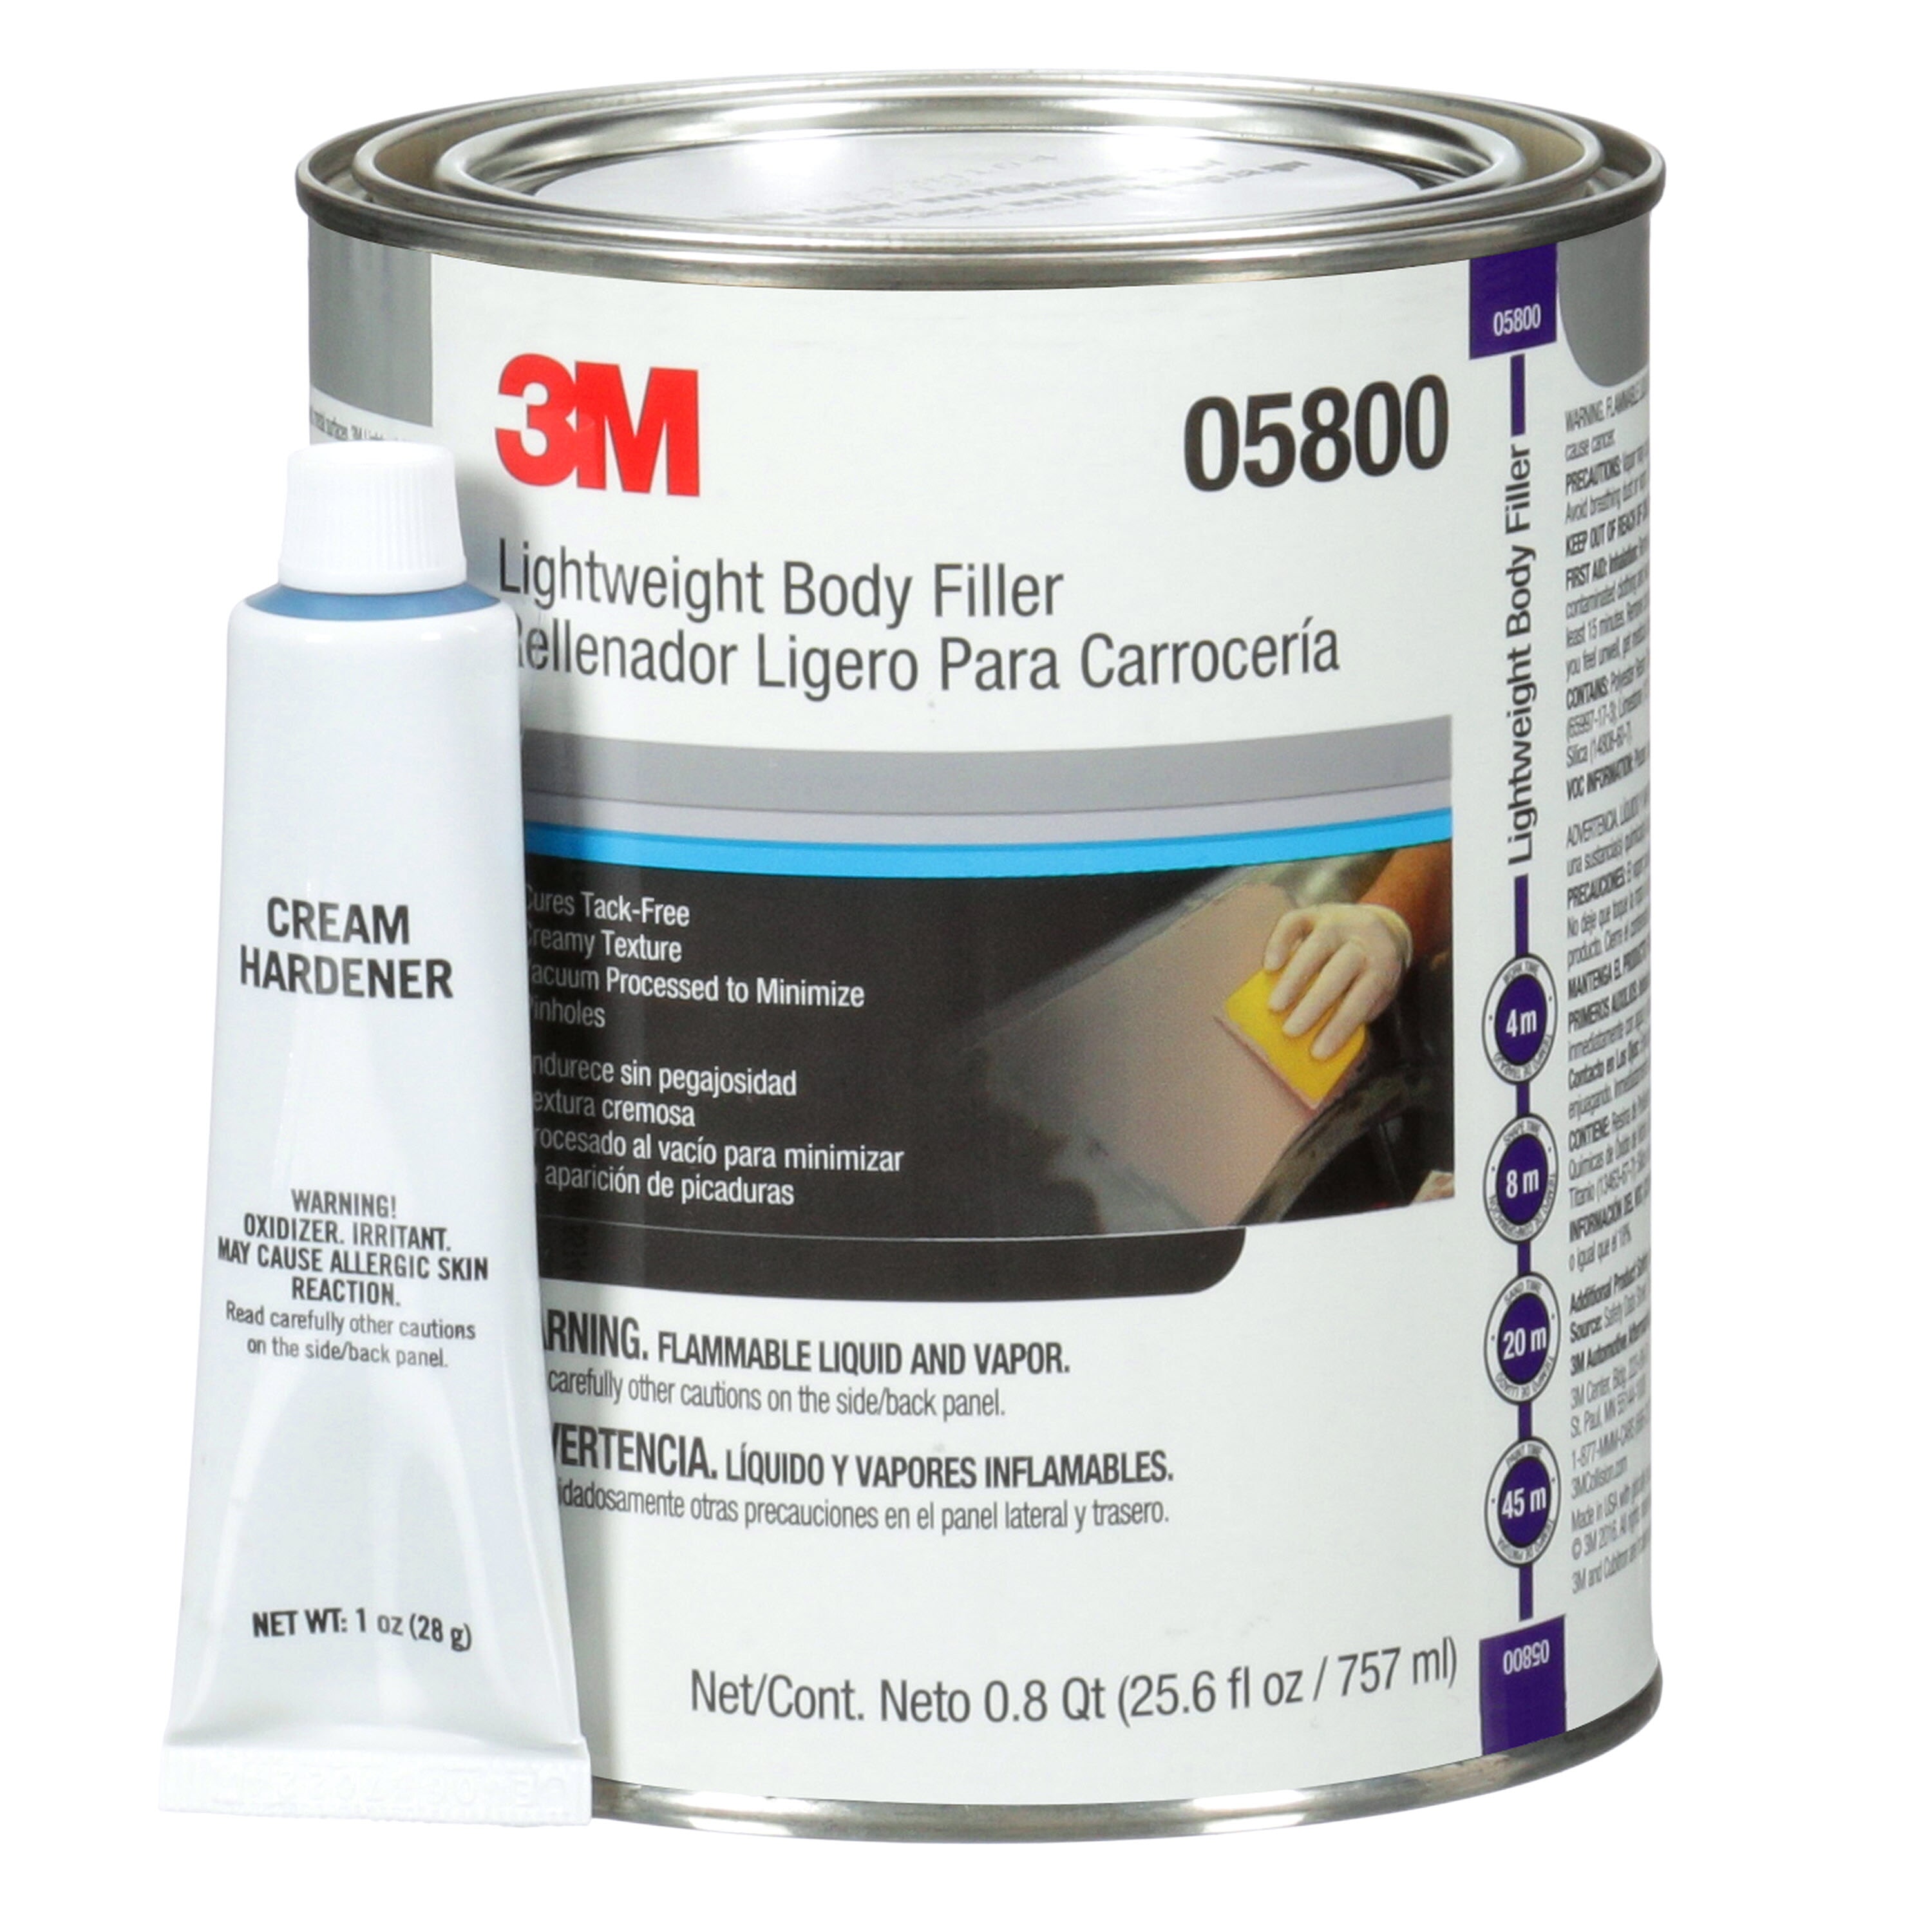 3M 7000045749 Lightweight Body Filler, 1 qt Container Can Container, Gray/Red, Paste Form